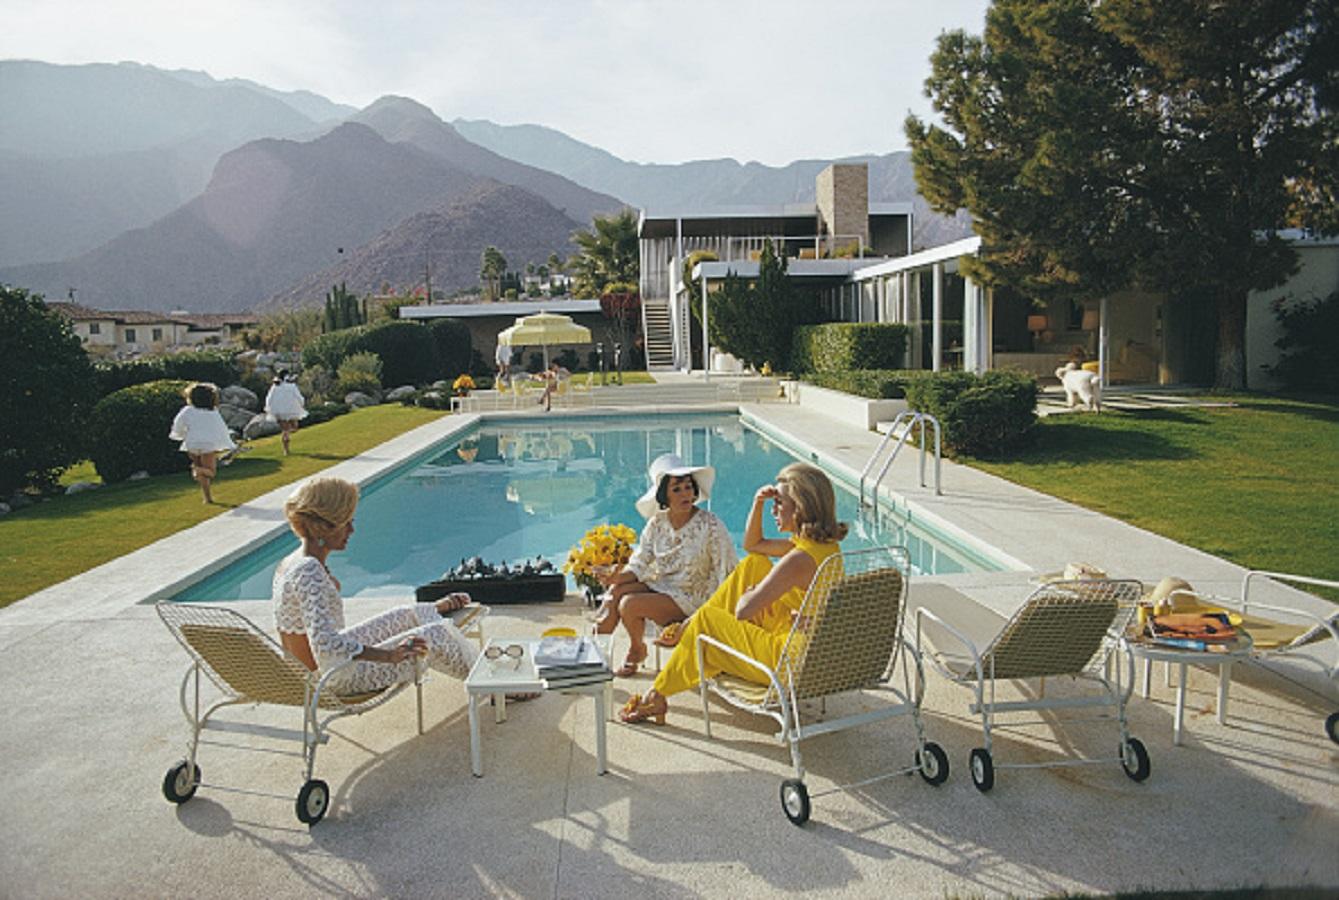 'Poolside Gaze' 1970 

Slim Aarons Limited Edition Estate Stamped Print

Former fashion model Helen Dzo Dzo Kaptur (in white lace), Nelda Linsk (in yellow), wife of art dealer Joseph Linsk, and actress Lita Baron (in white sunhat) at the Kaufmann